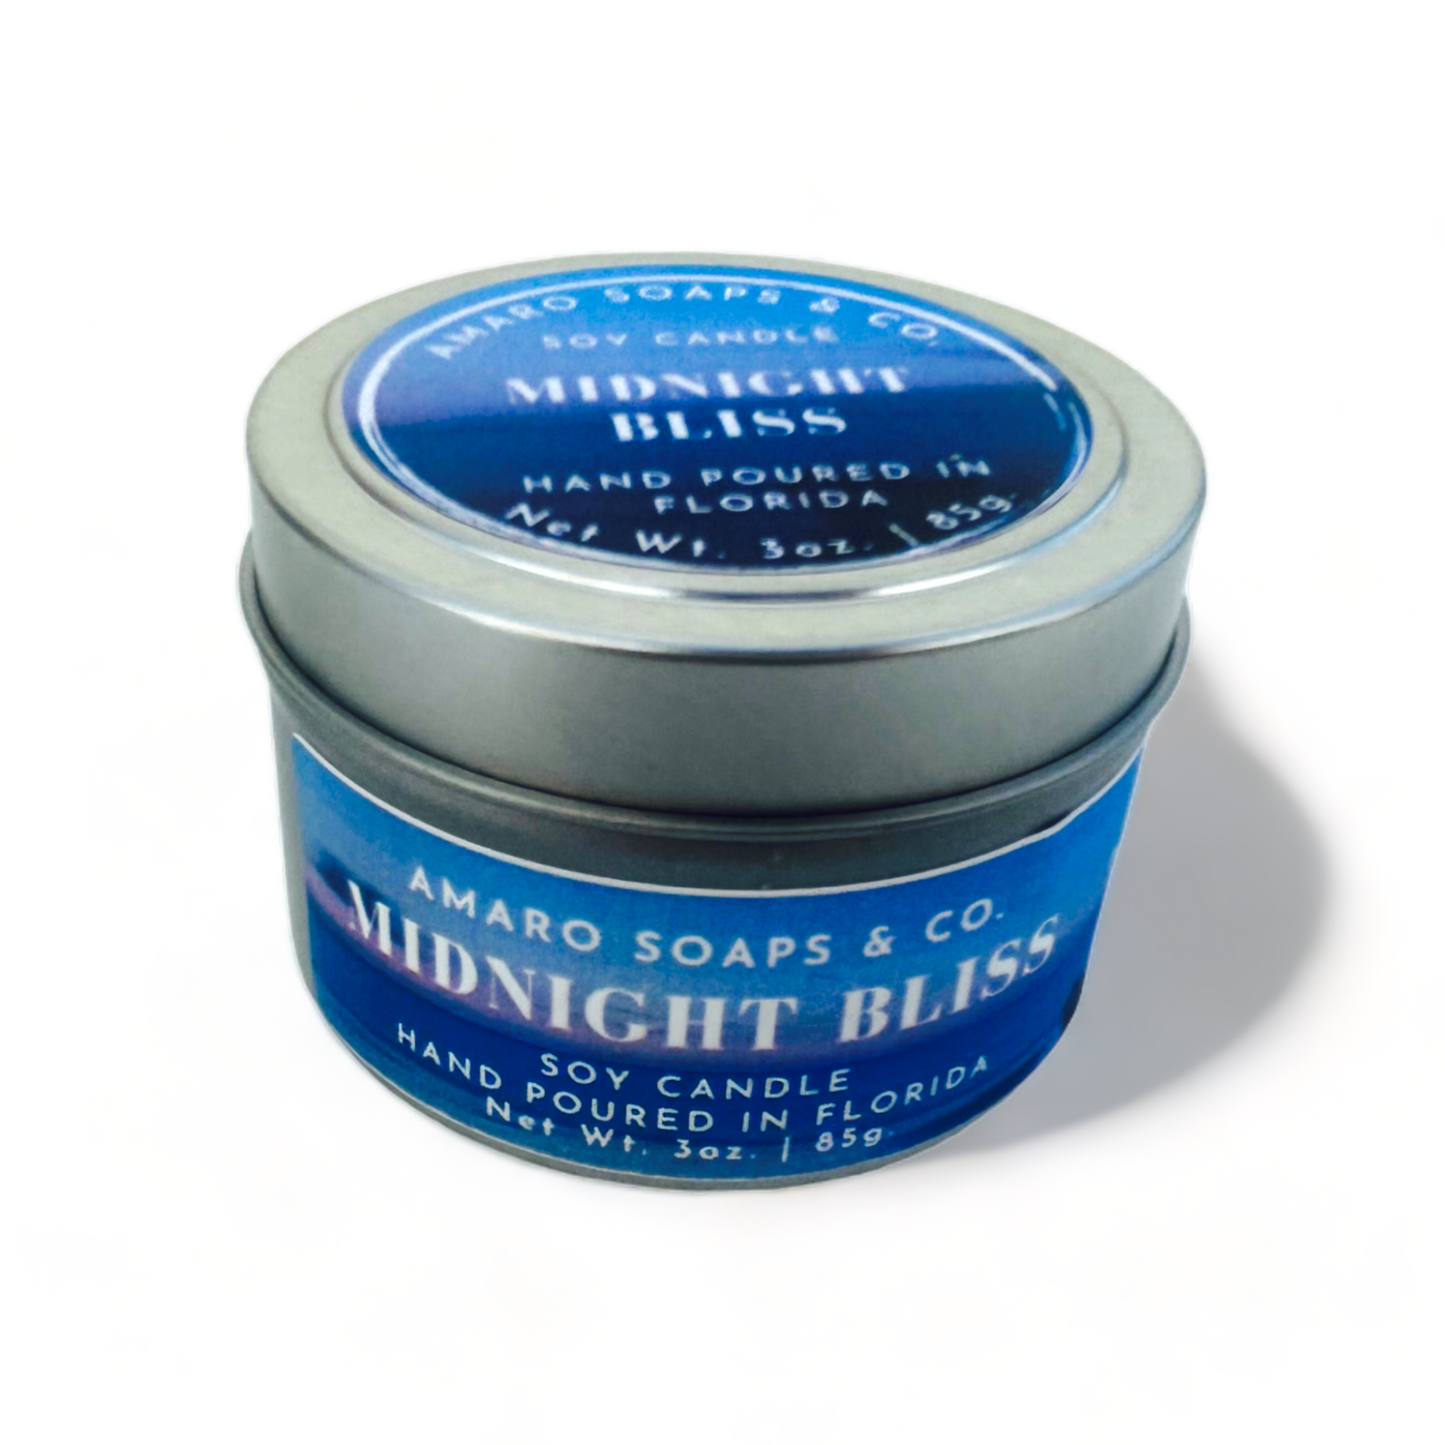 Midnight Bliss Soy Candle Tin